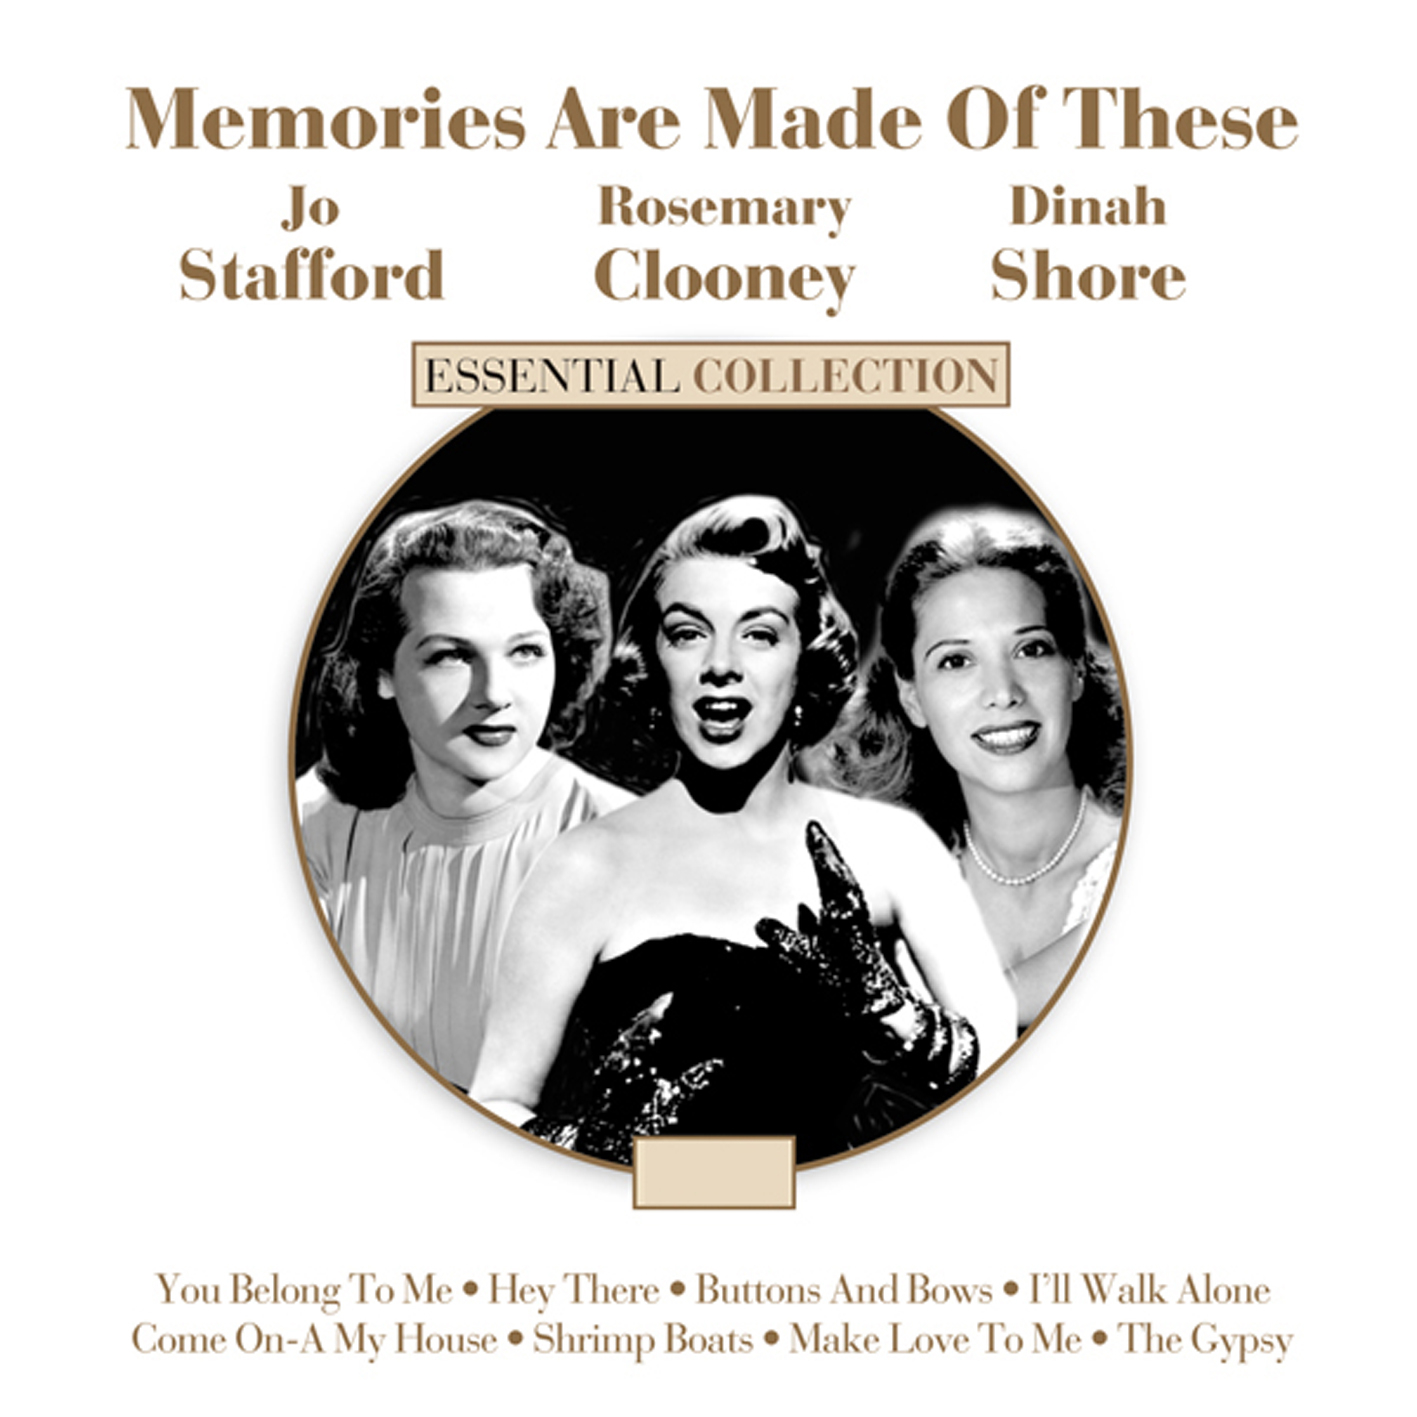 Memories are Made of These -Jo Stafford/Rosemary Clooney/Dinah Shore